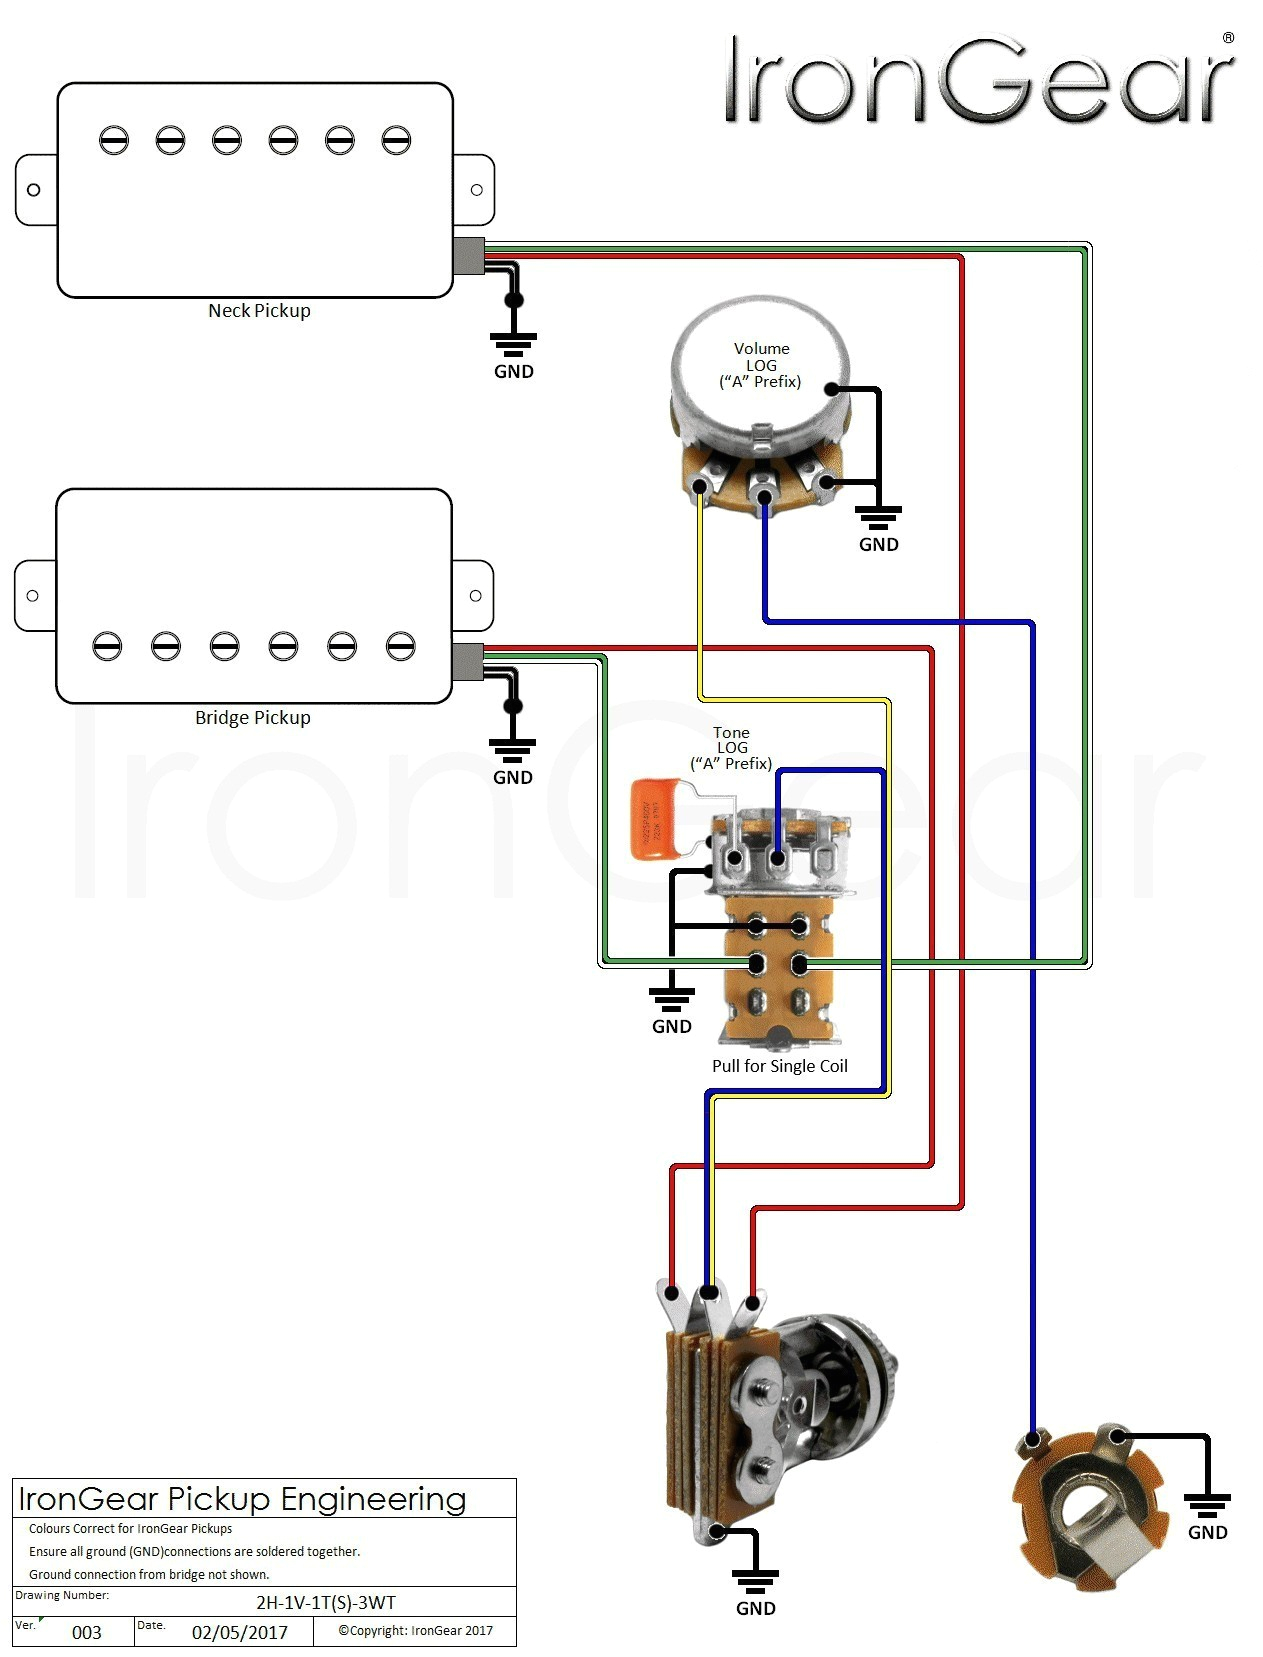 stratocaster wiring diagram awesome easy guitar valid emg hz les paul pics of or inspirationa yamaha